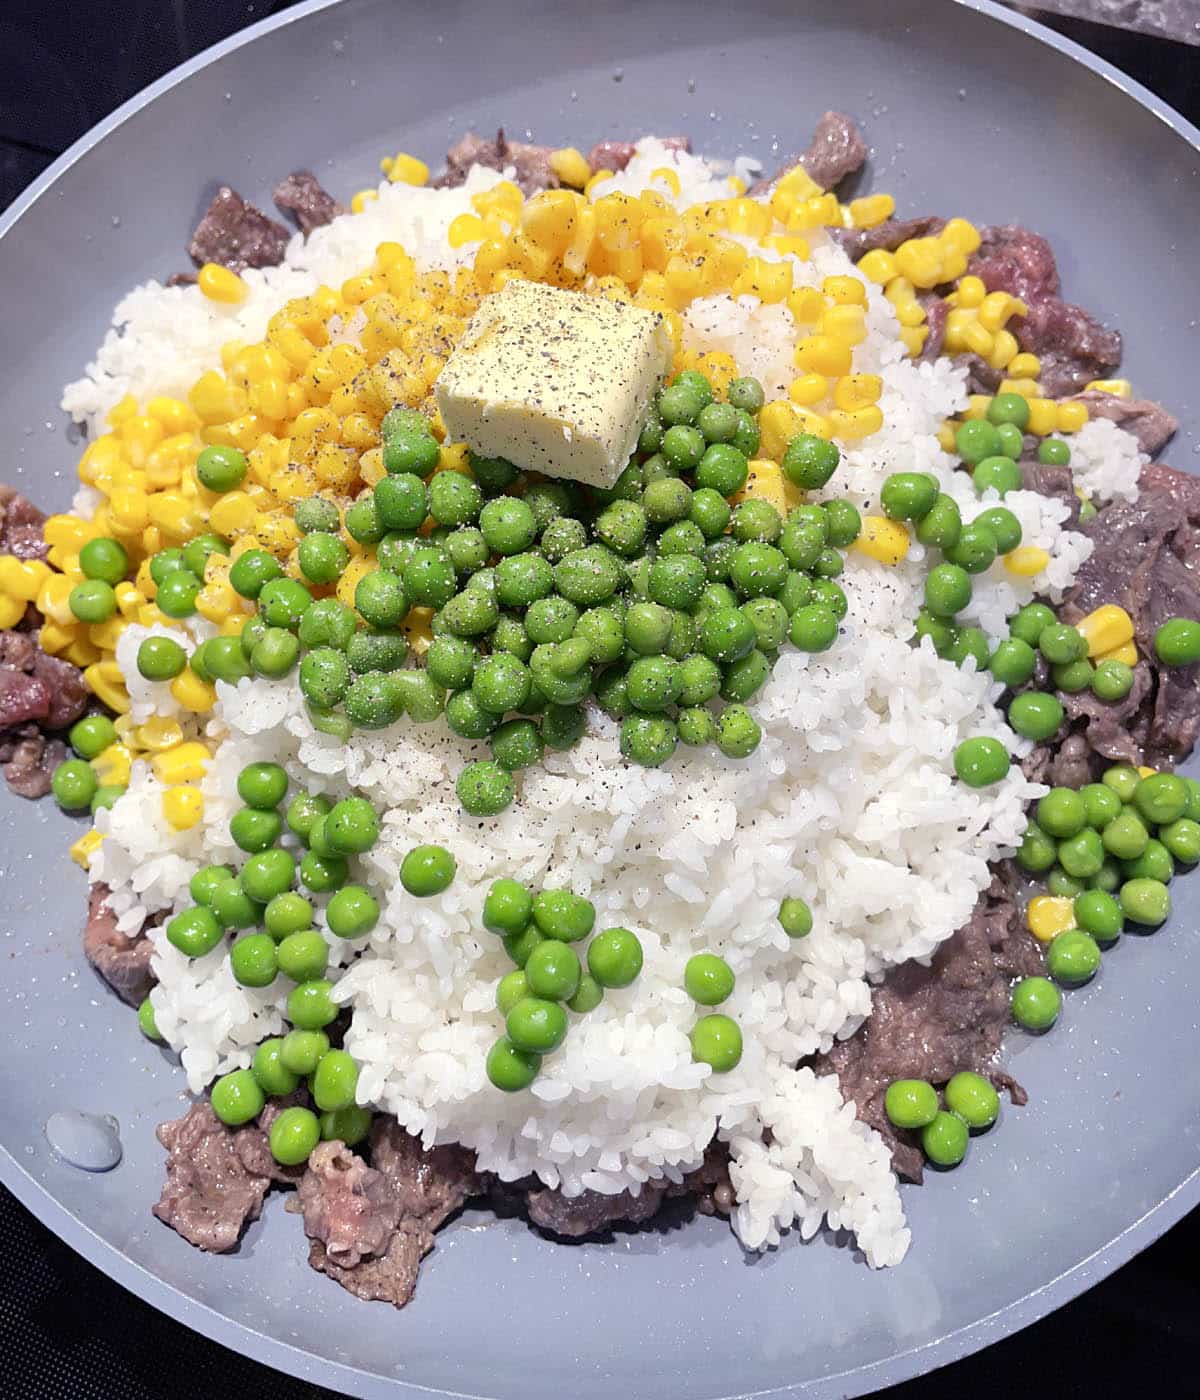 A round grey pan containing yellow corn, green peas, white rice, and beef.